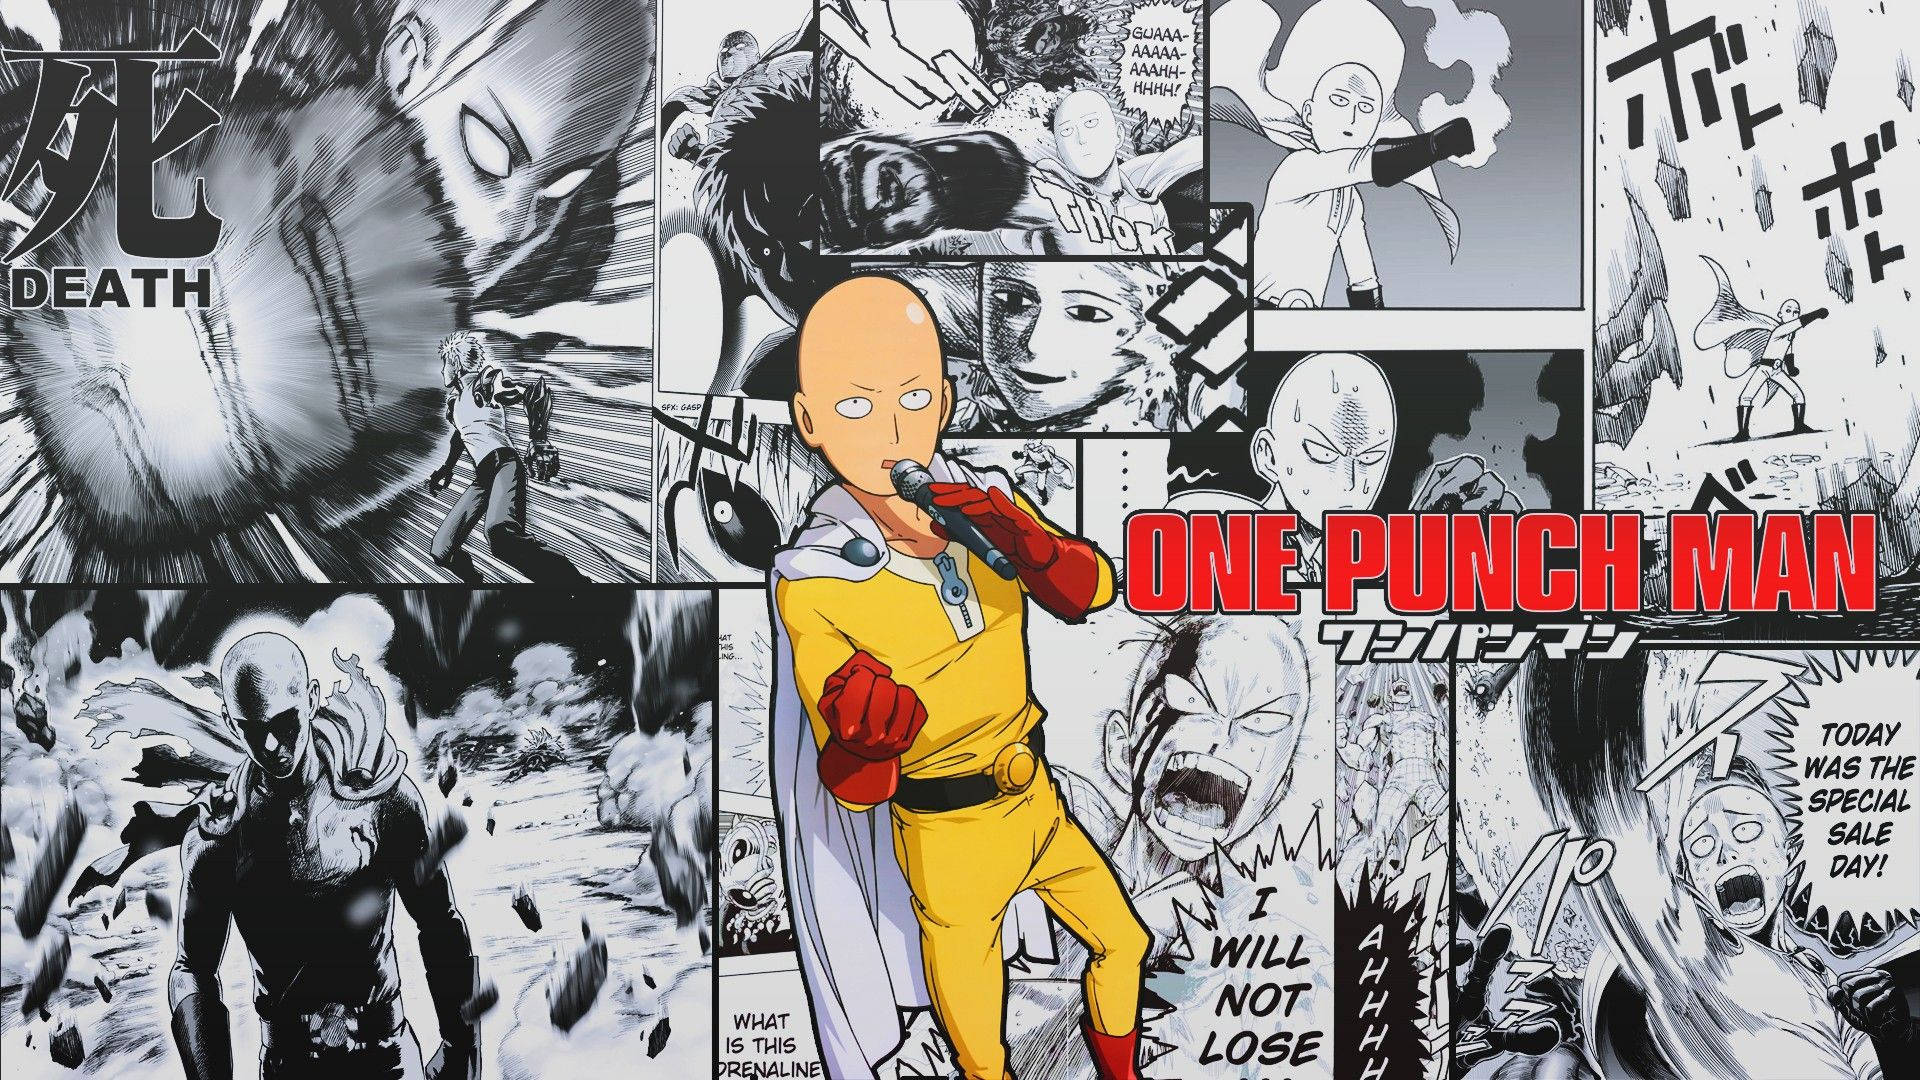 One Punch Man Wallpaper Discover more Character Japanese One Fist One  Punch Man Overwhelming wa  One punch man manga One punch man funny One  punch man anime